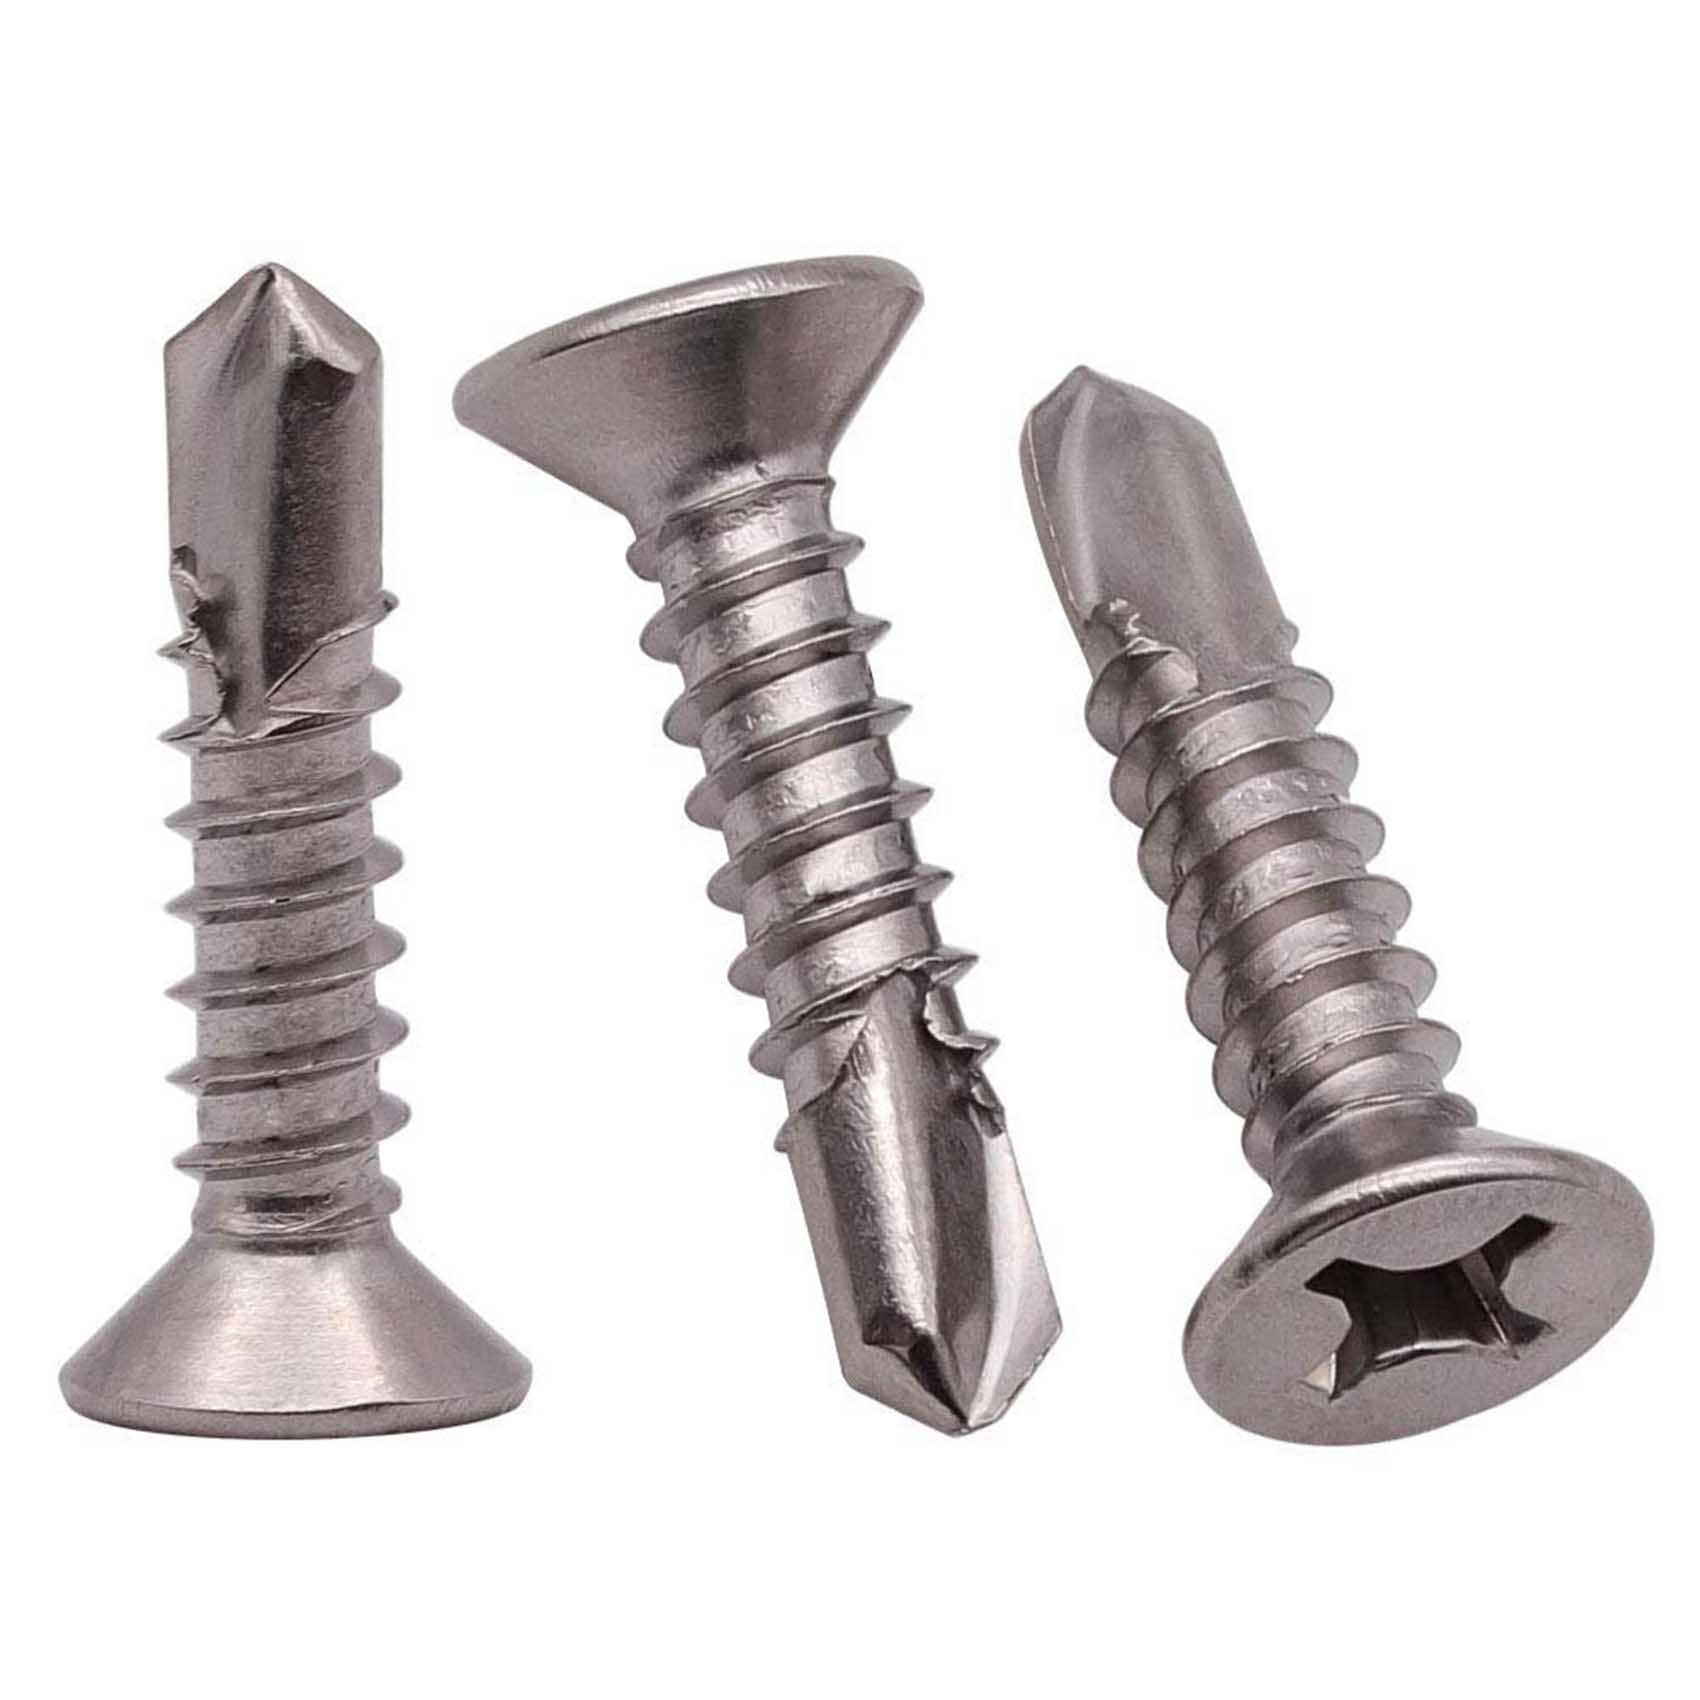 Stainless Steel CSK Phillips Head Screw  Suppliers in Mumbai India